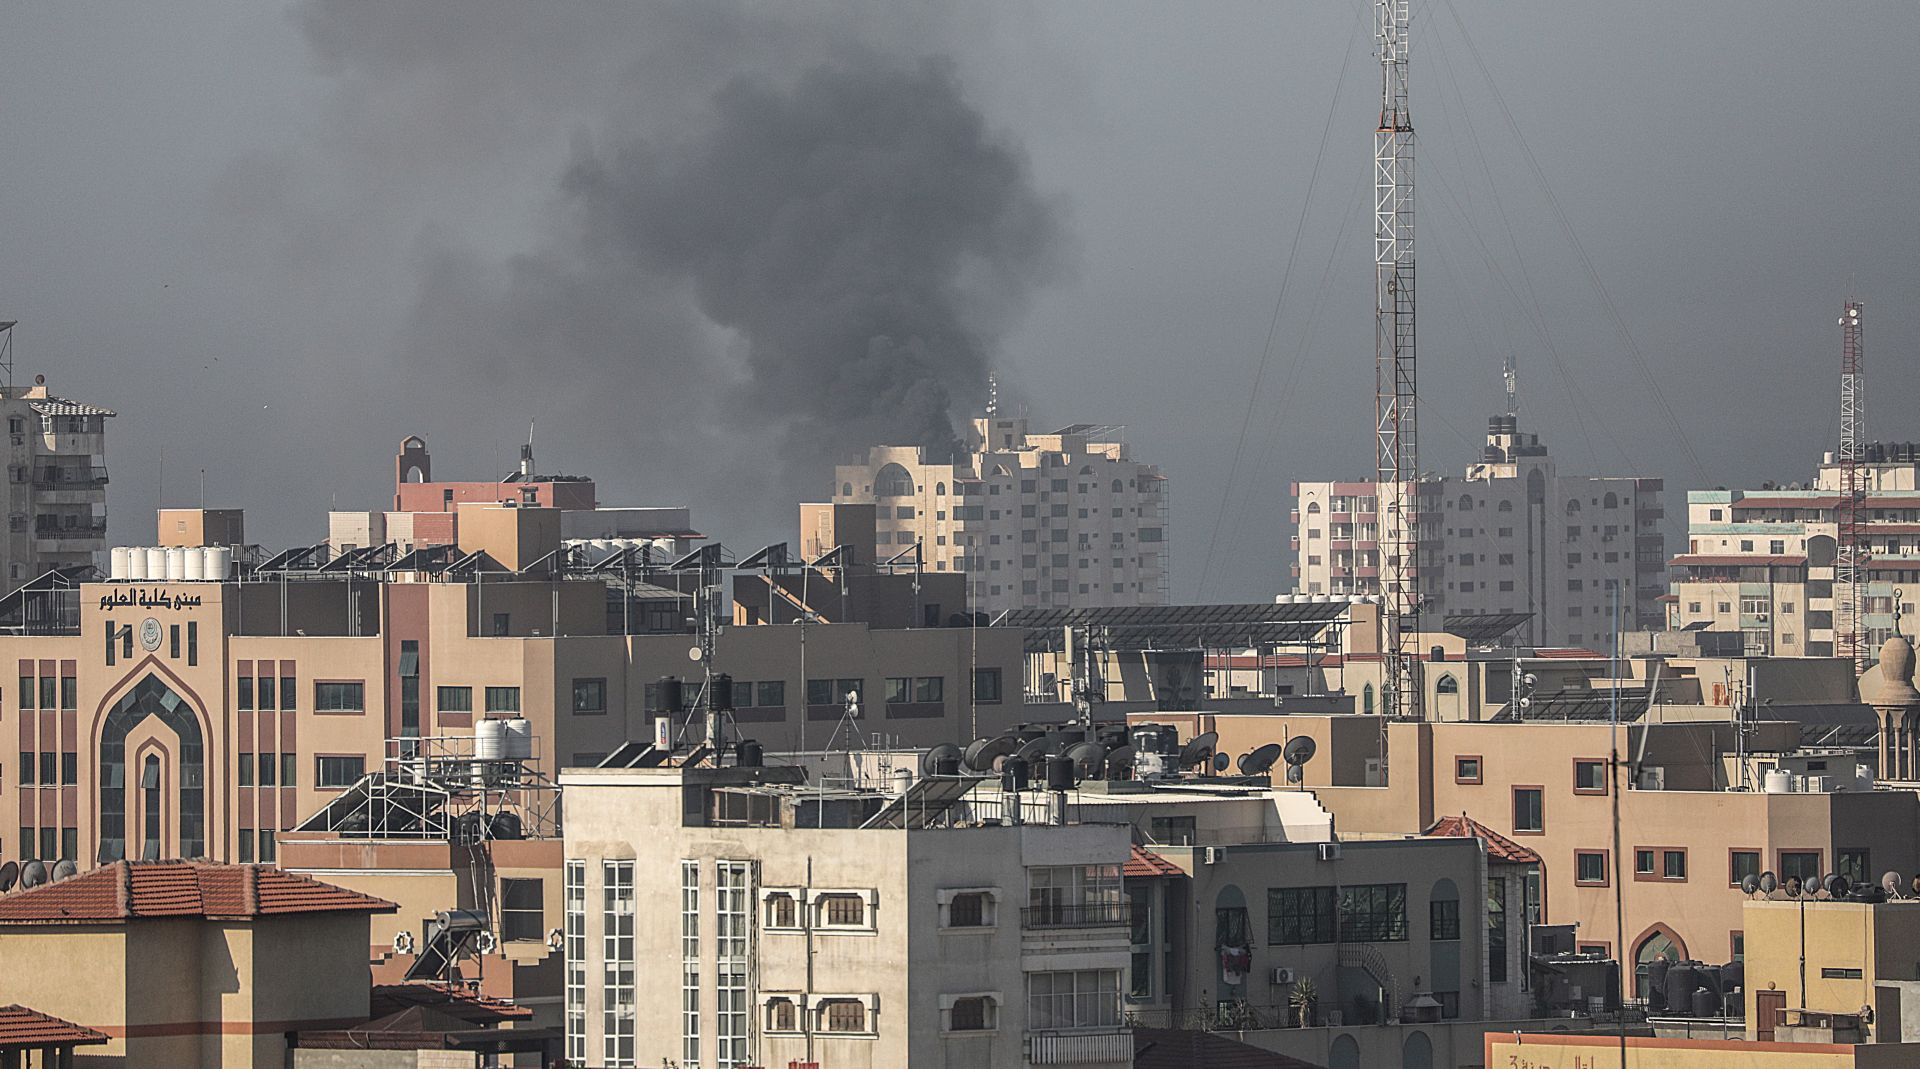 epa07990141 Smoke rises from a building (background) following an Israeli airstrike in Gaza City, 12 November 2019. According to reports, the Israeli Air Force (IAF) has targeted and killed in Gaza early 12 November, Bahaa Abu-el Atta (Baha Abu al-Ata), a senior Islamic Jihad commander who Israel has accused of being behind recent barrages of rockets. The Israeli raids in Gaza immediately prompted rounds of retaliatory rockets from Gaza.  EPA/MOHAMMED SABER